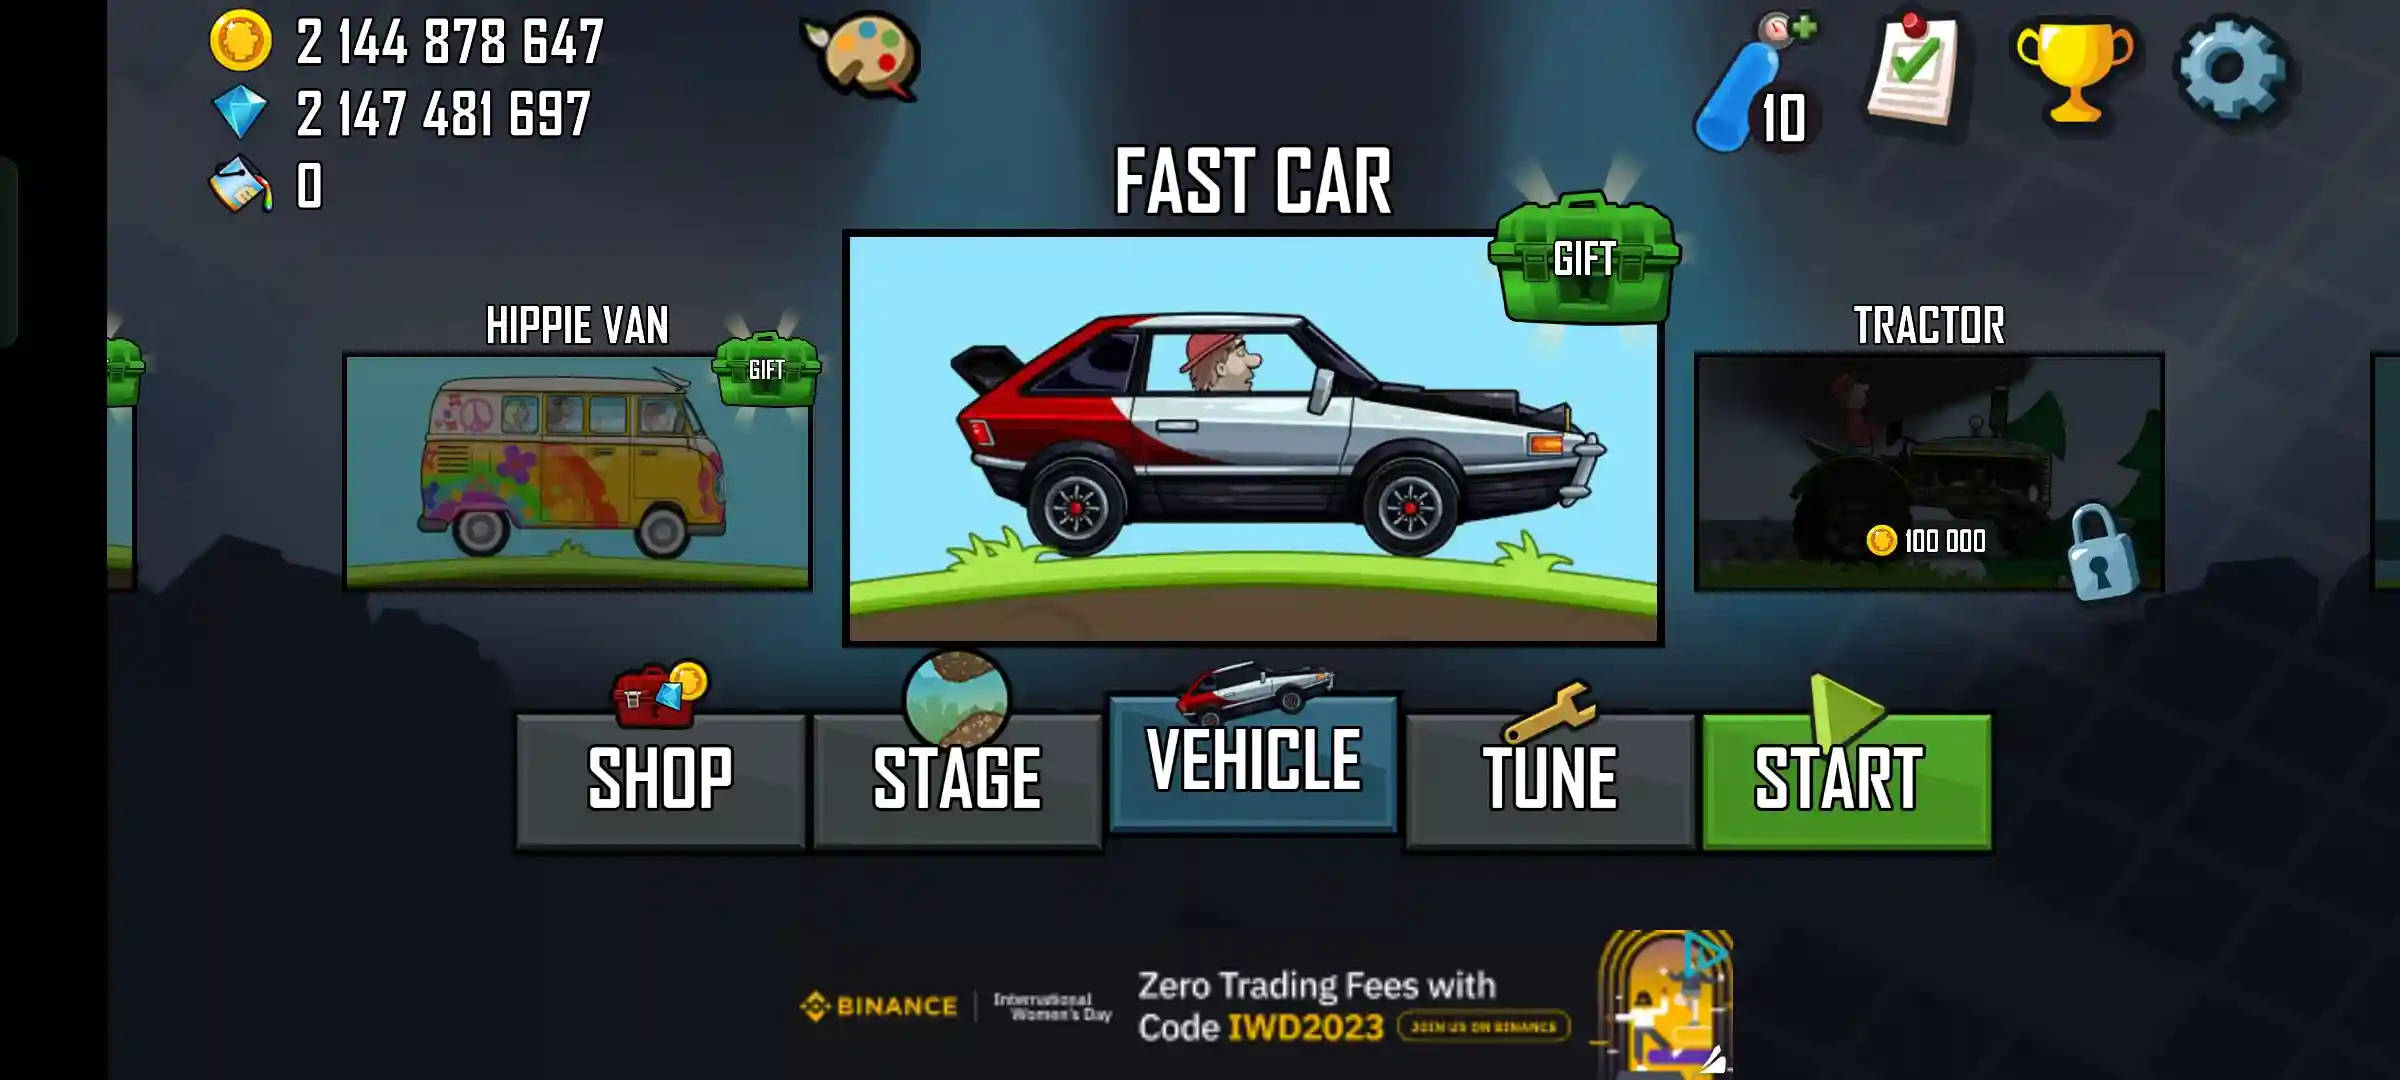 Hill Climb Racing MOD APK v1.60.1 (Unlimited Everything) Download